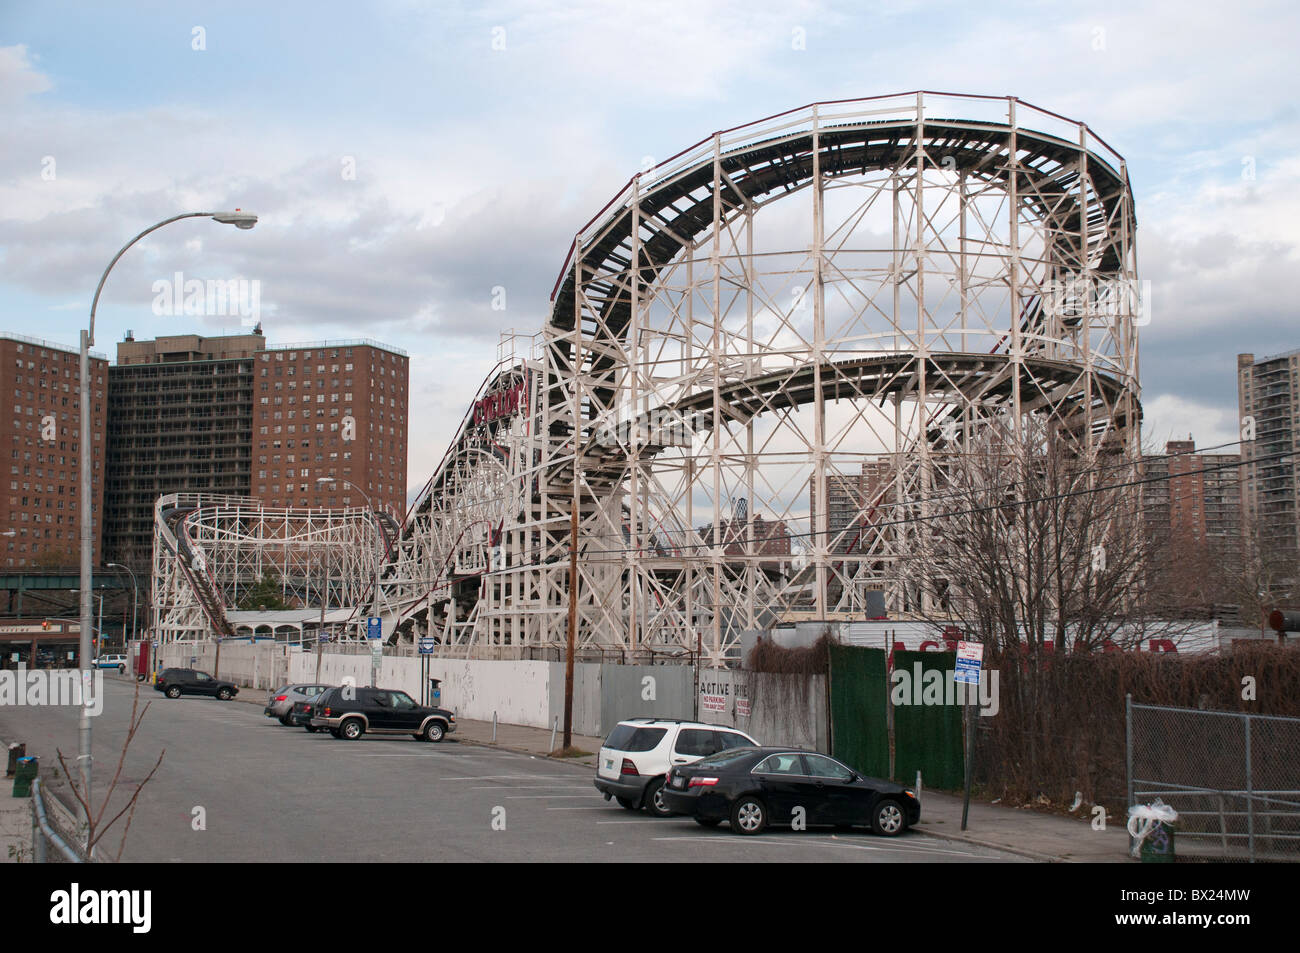 The Cyclone roller coaster at Coney Island Brooklyn, New York. Stock Photo